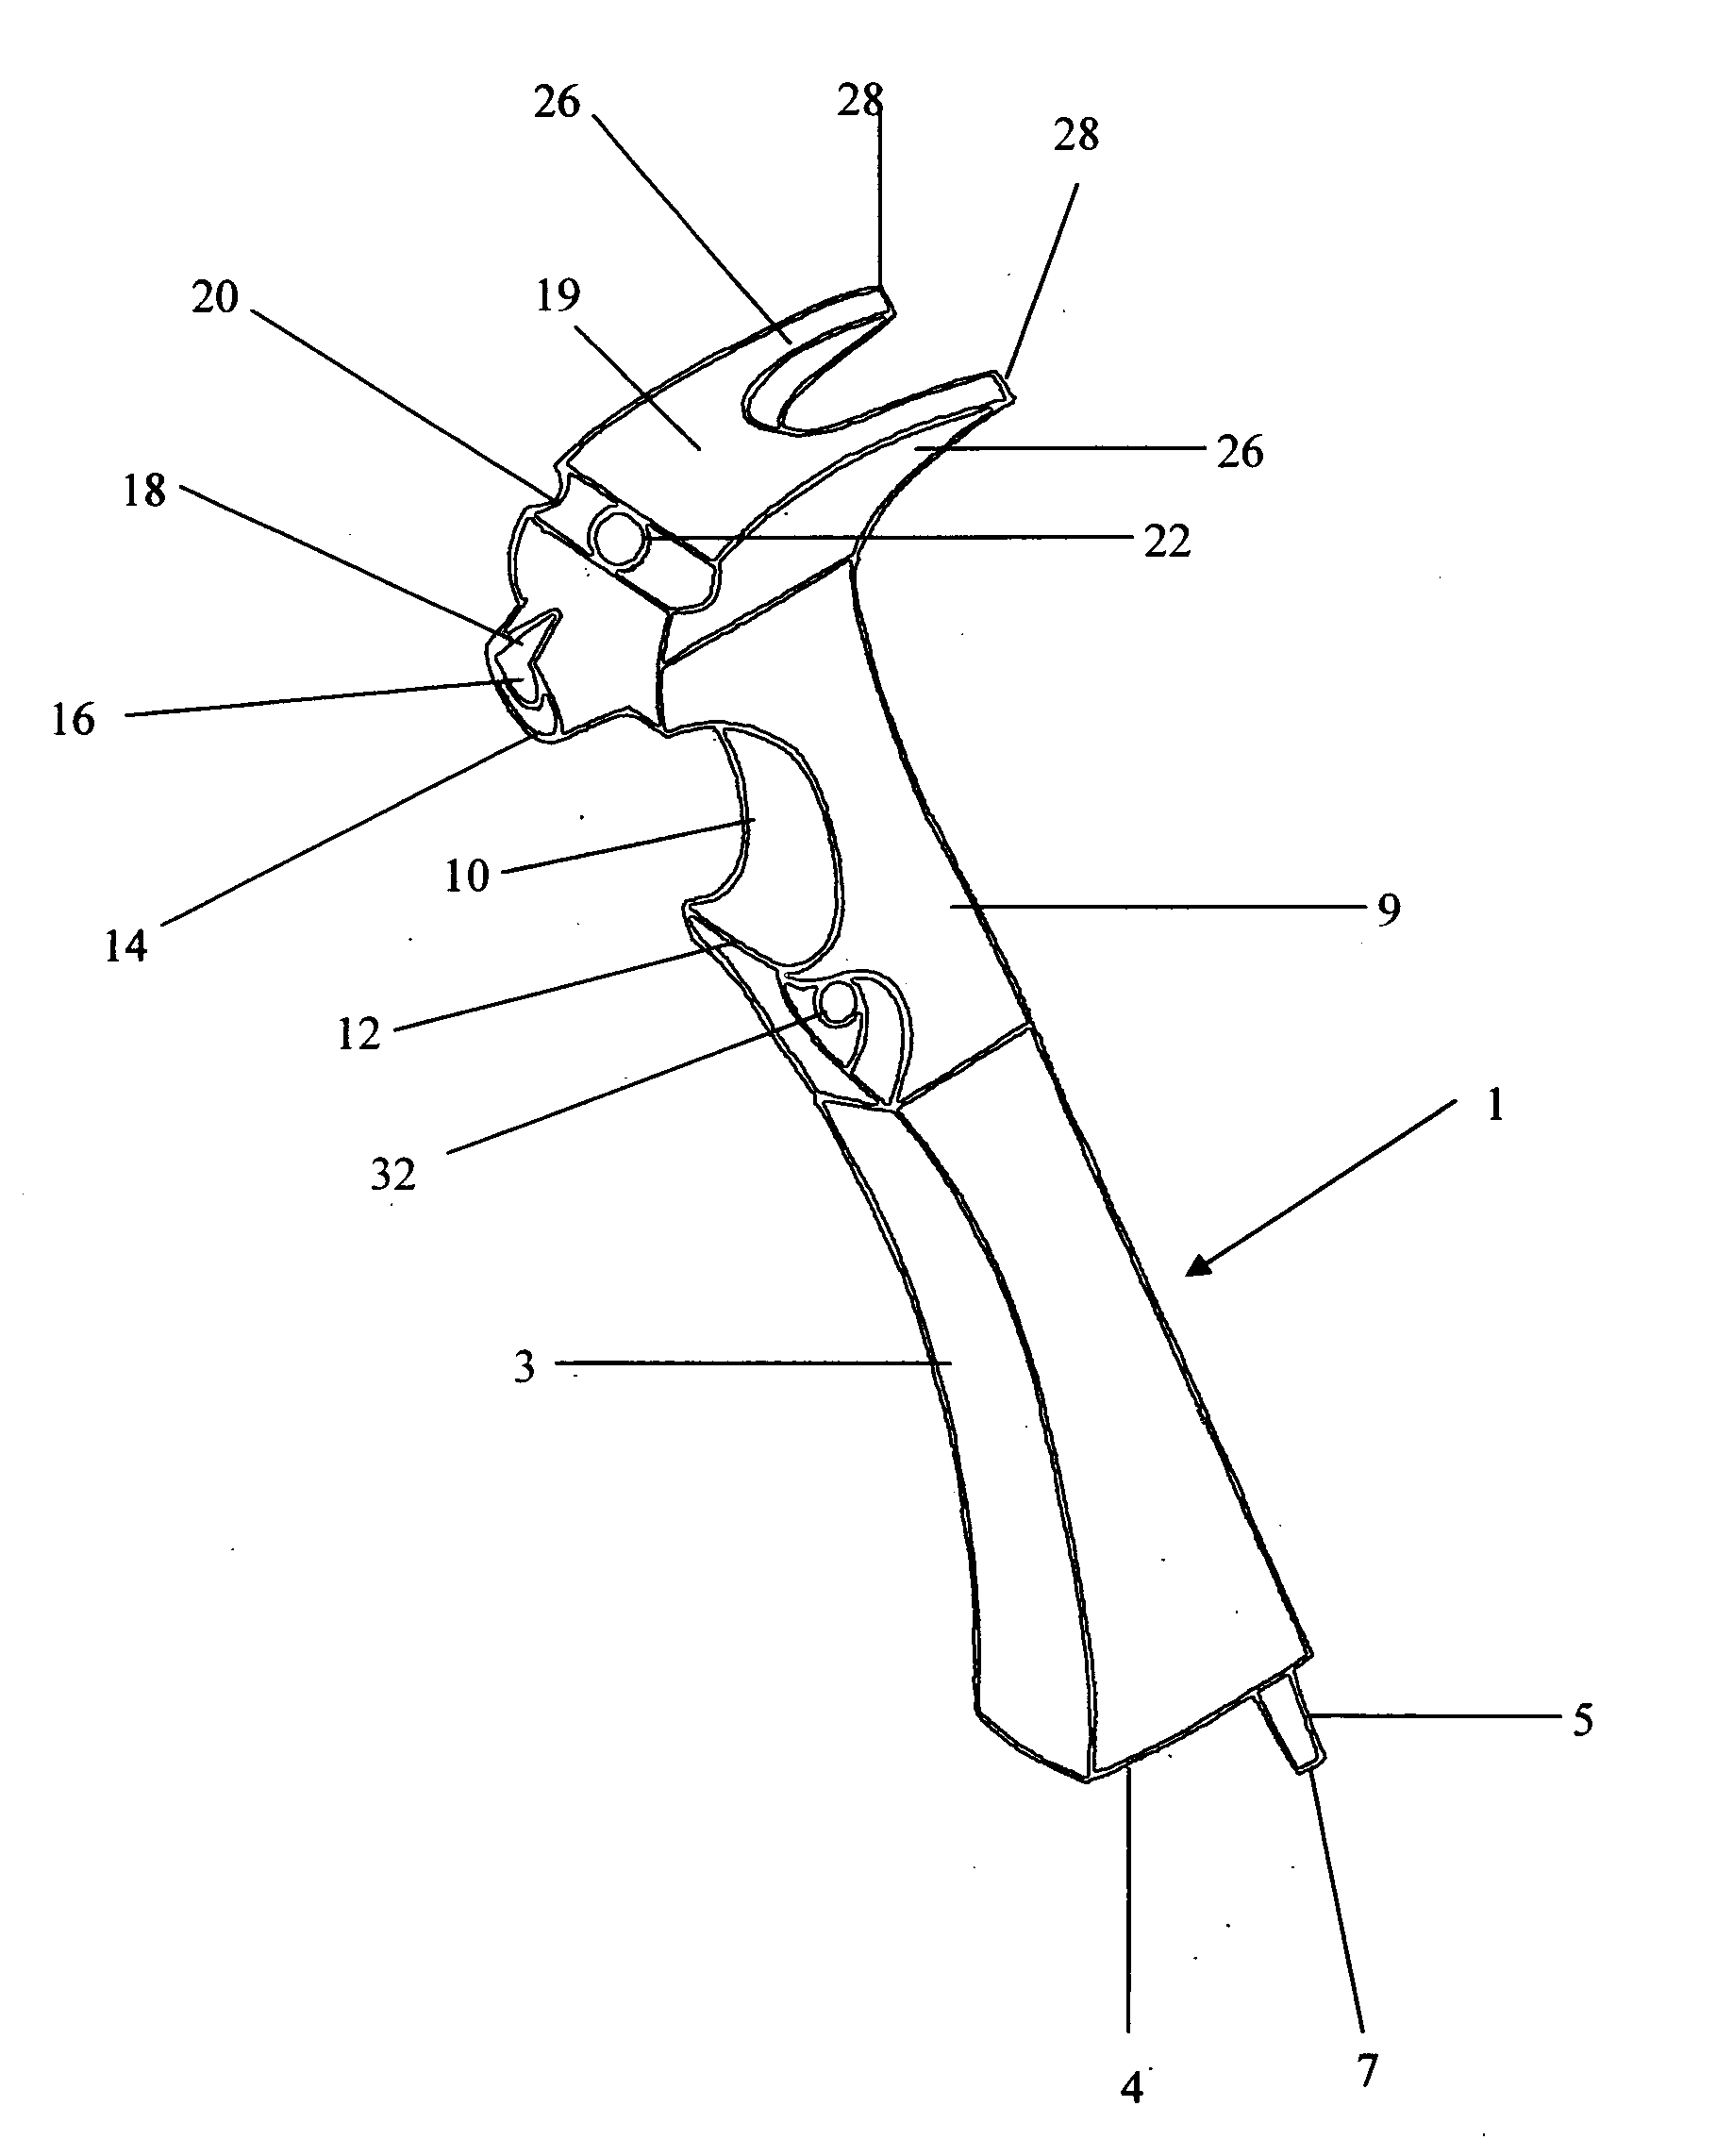 Hand-operated multi-function tool